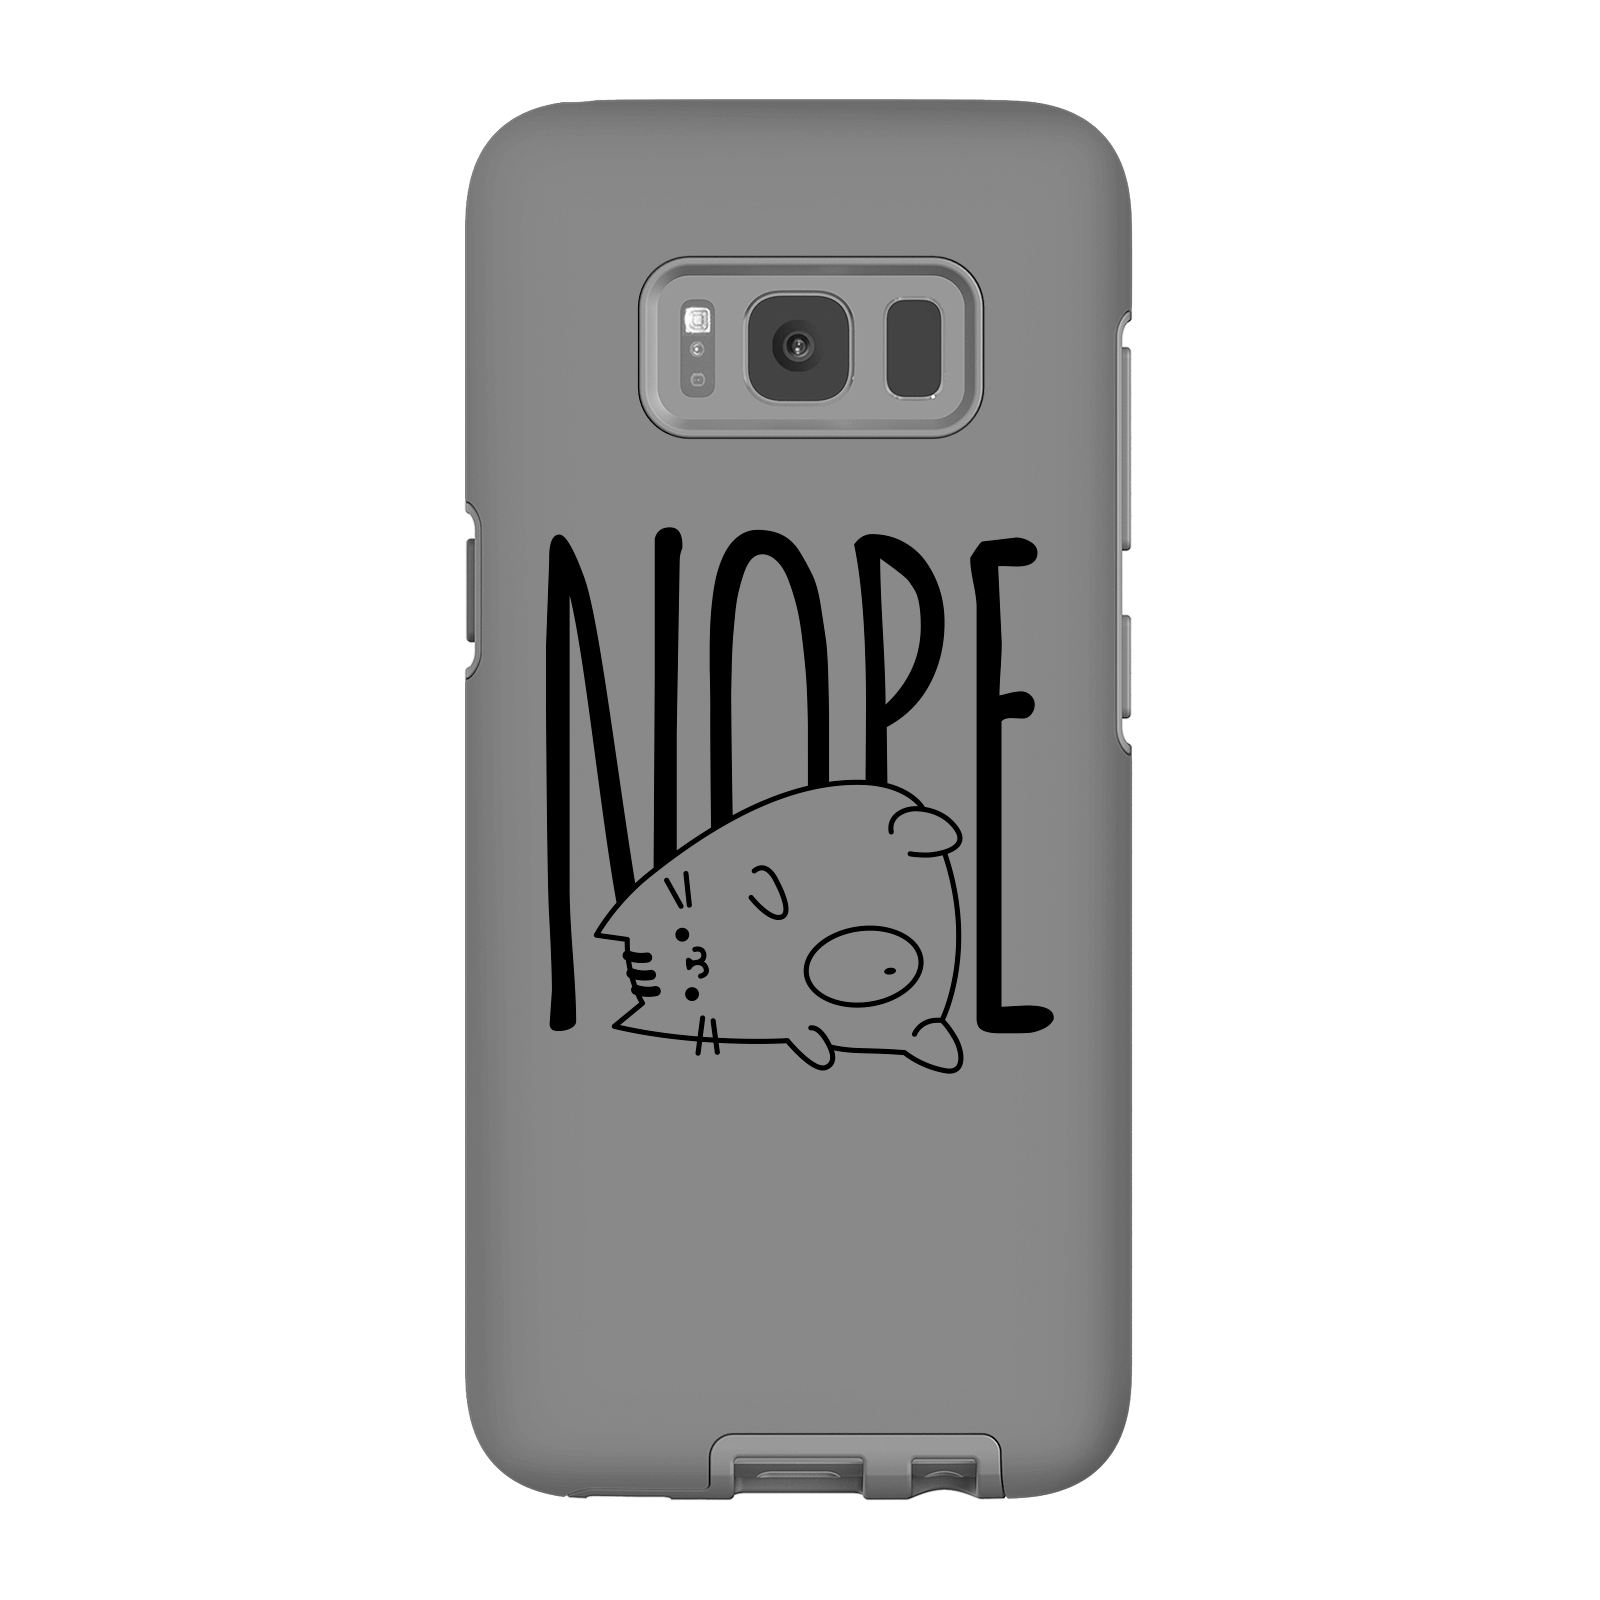 Nope Phone Case for iPhone and Android - Samsung S8 - Tough Case - Gloss